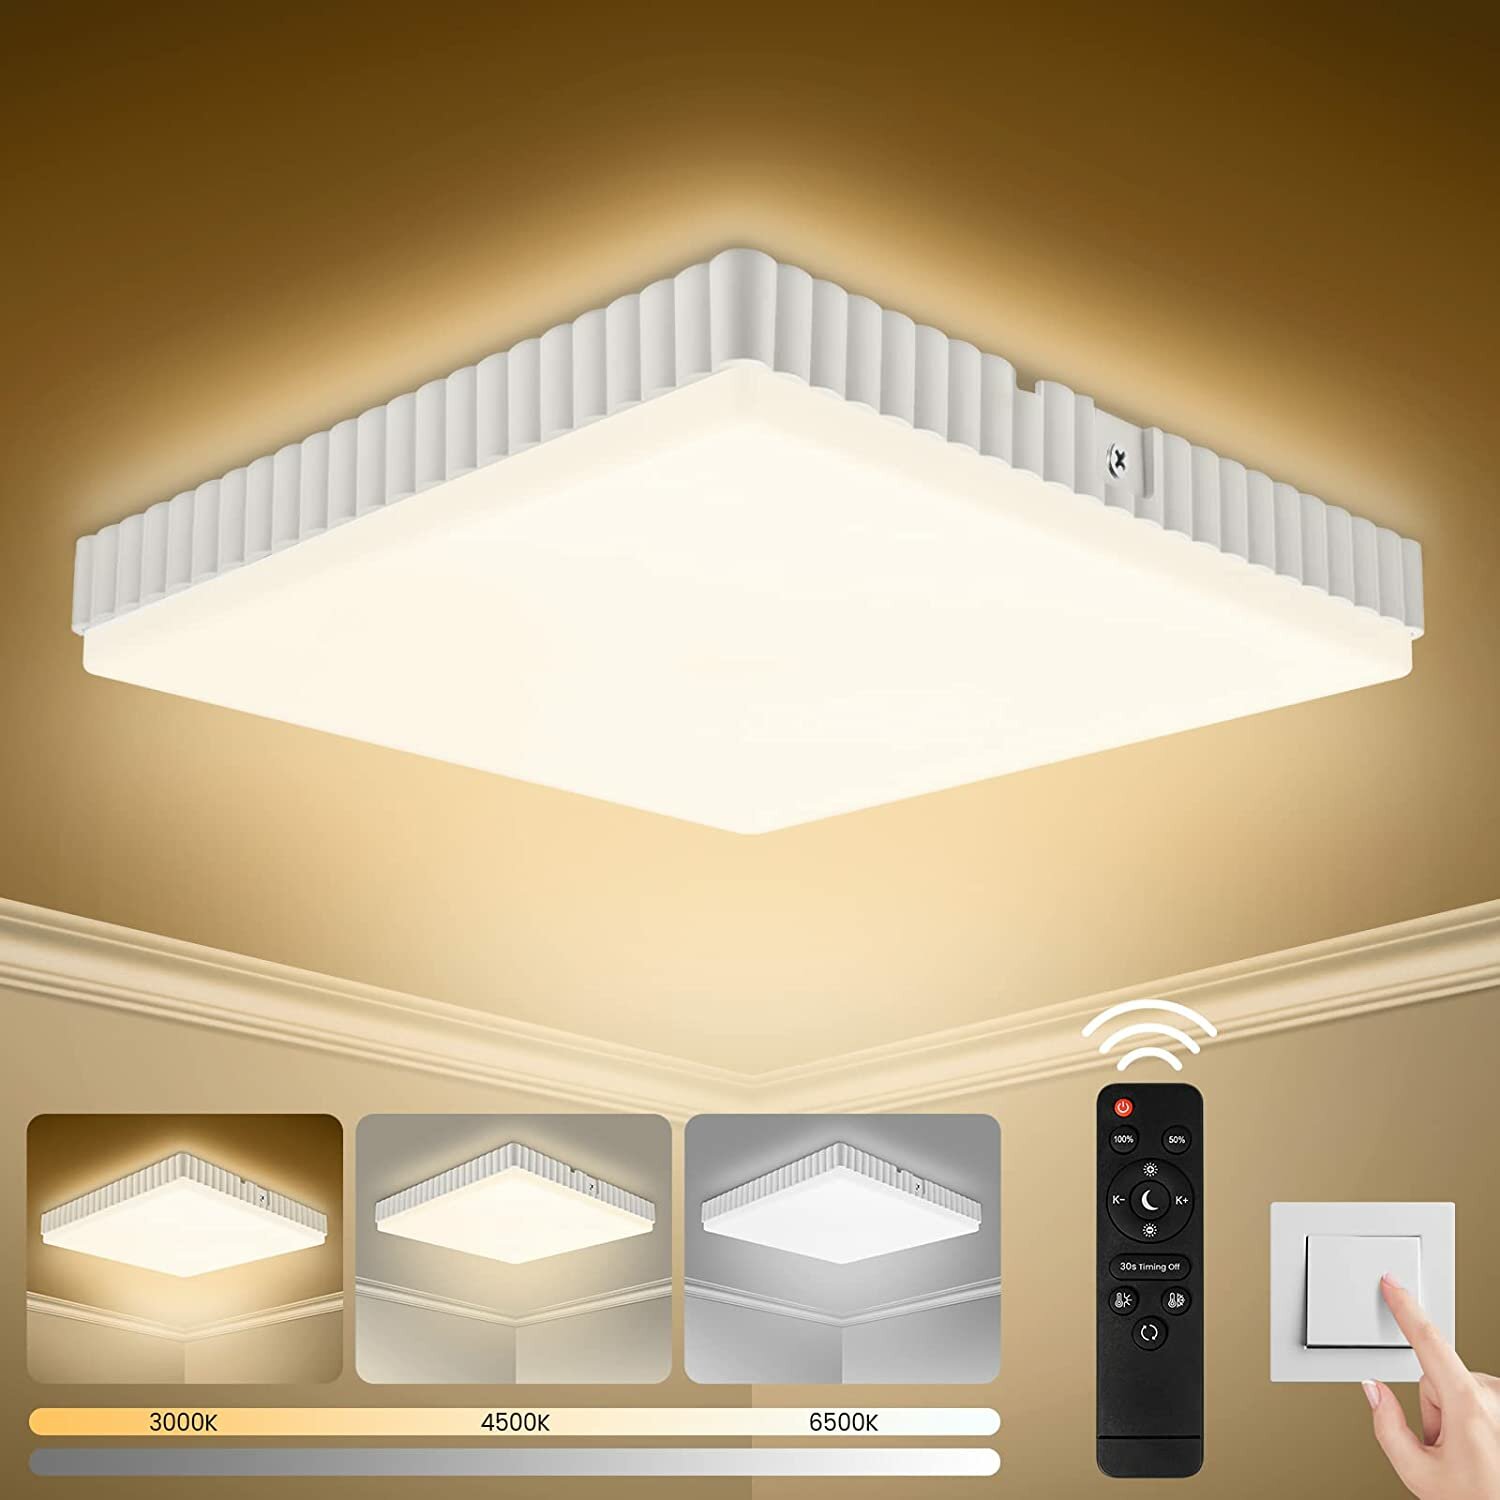 best price,24w,square,three,color,ceiling,lamp,eu,coupon,price,discount